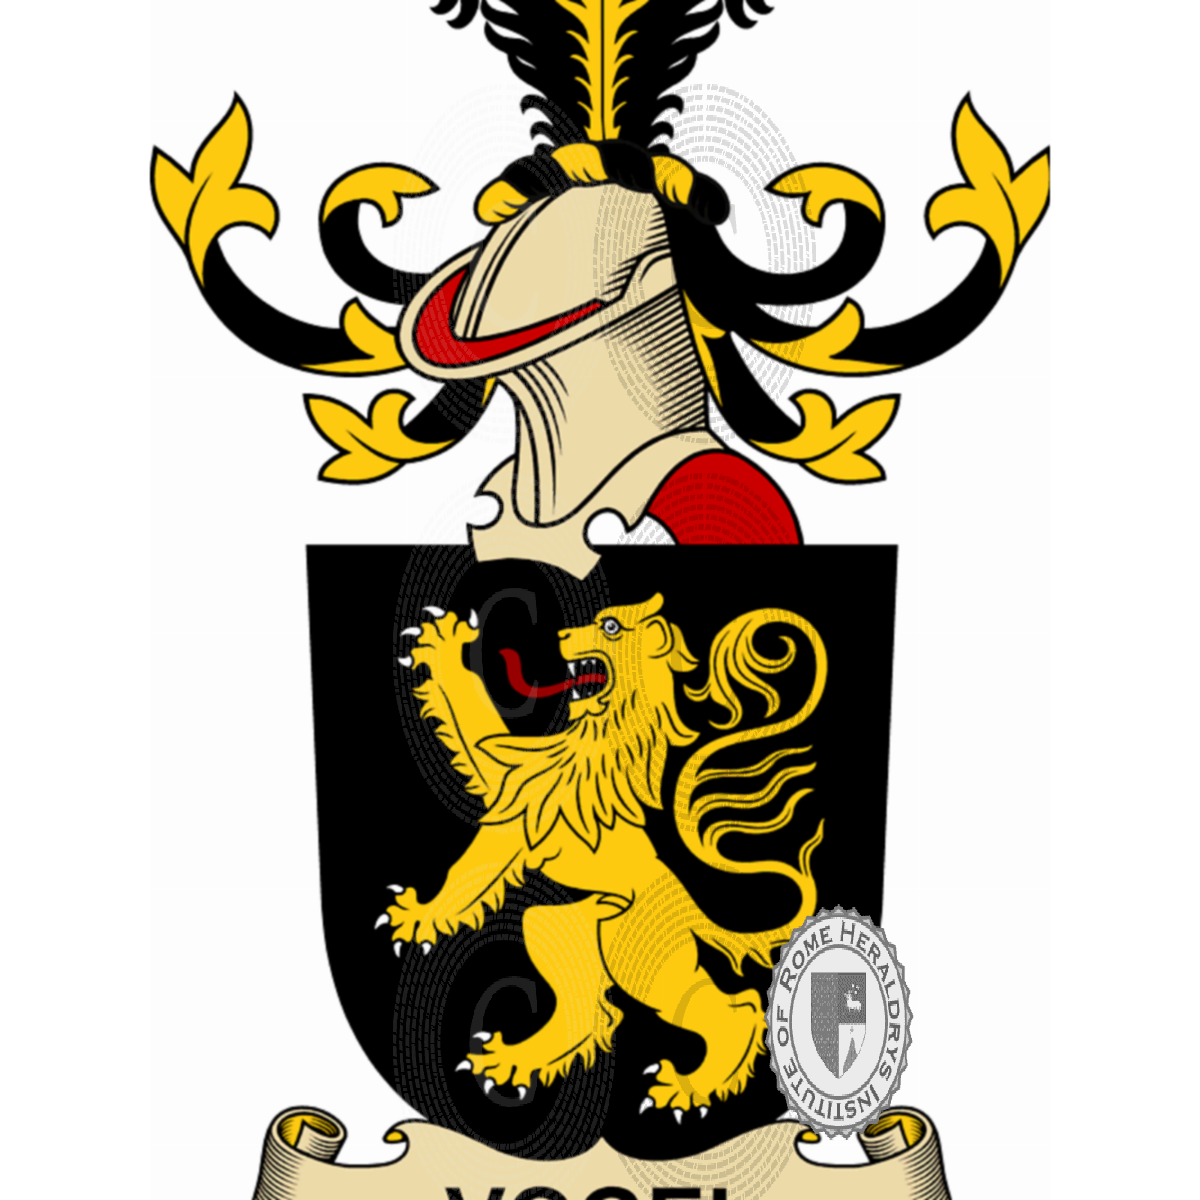 Coat of arms of familyVogel